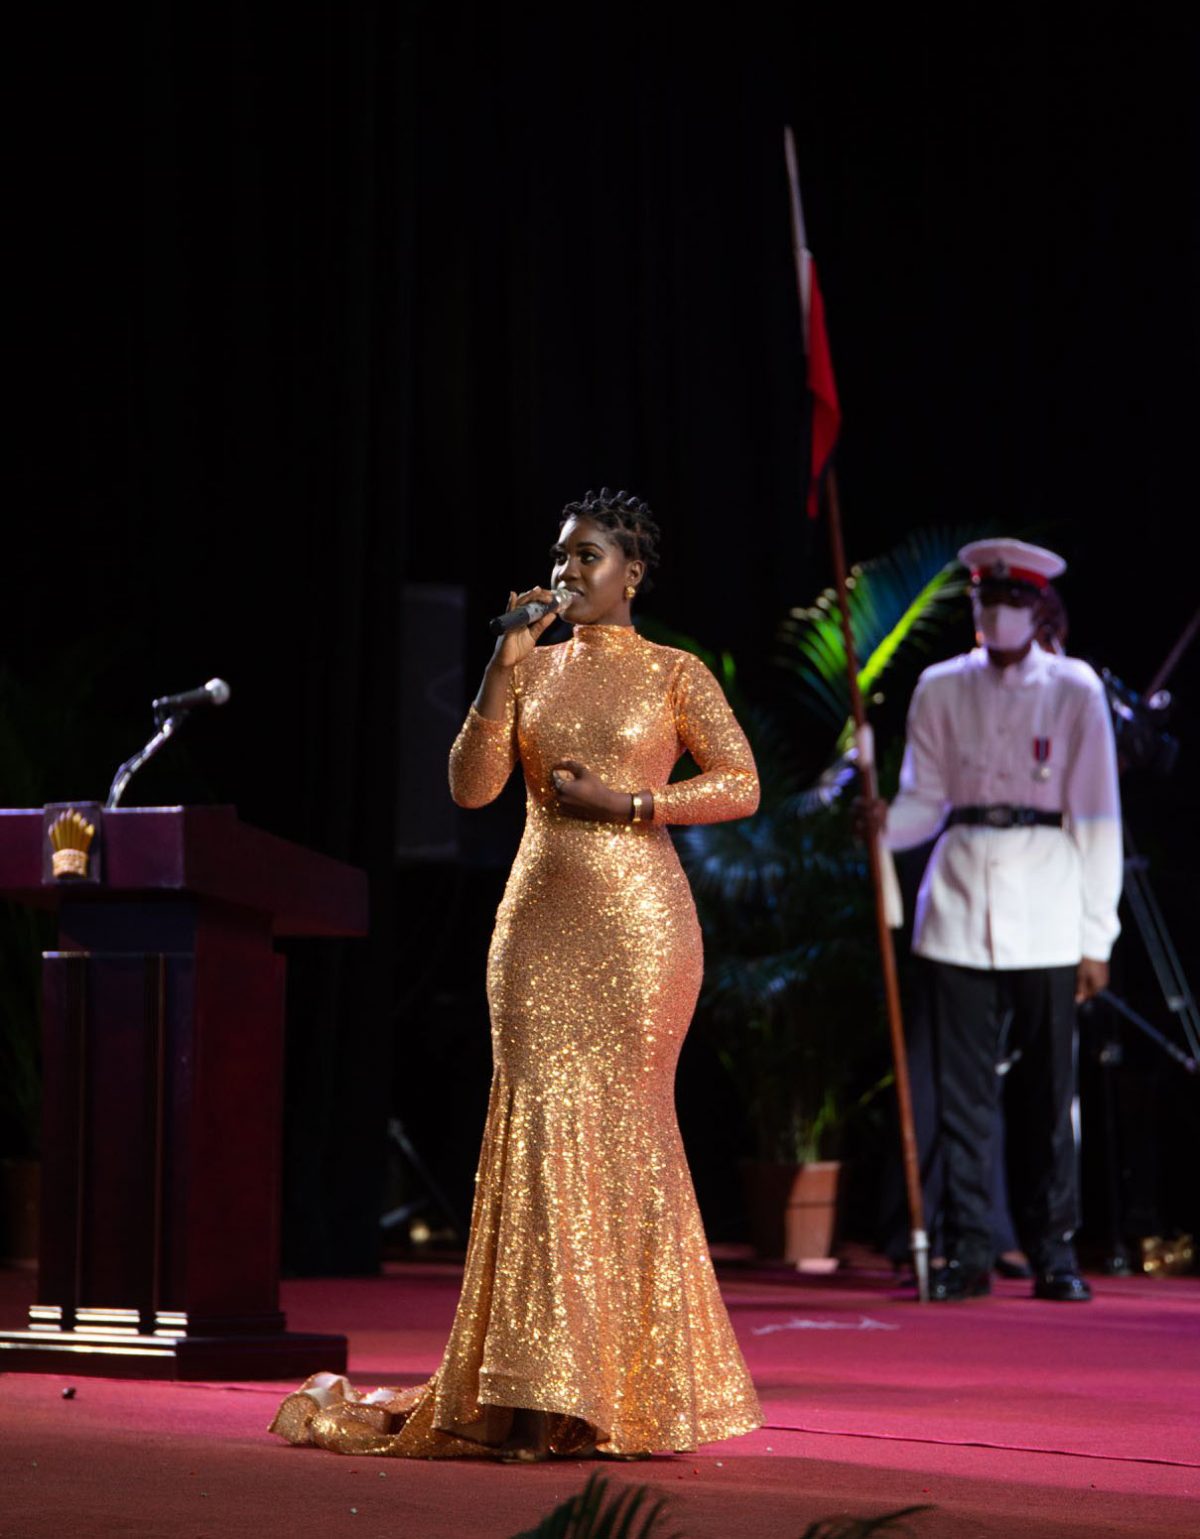 Jackie Jaxx during her performance at the inauguration (DPI photo)